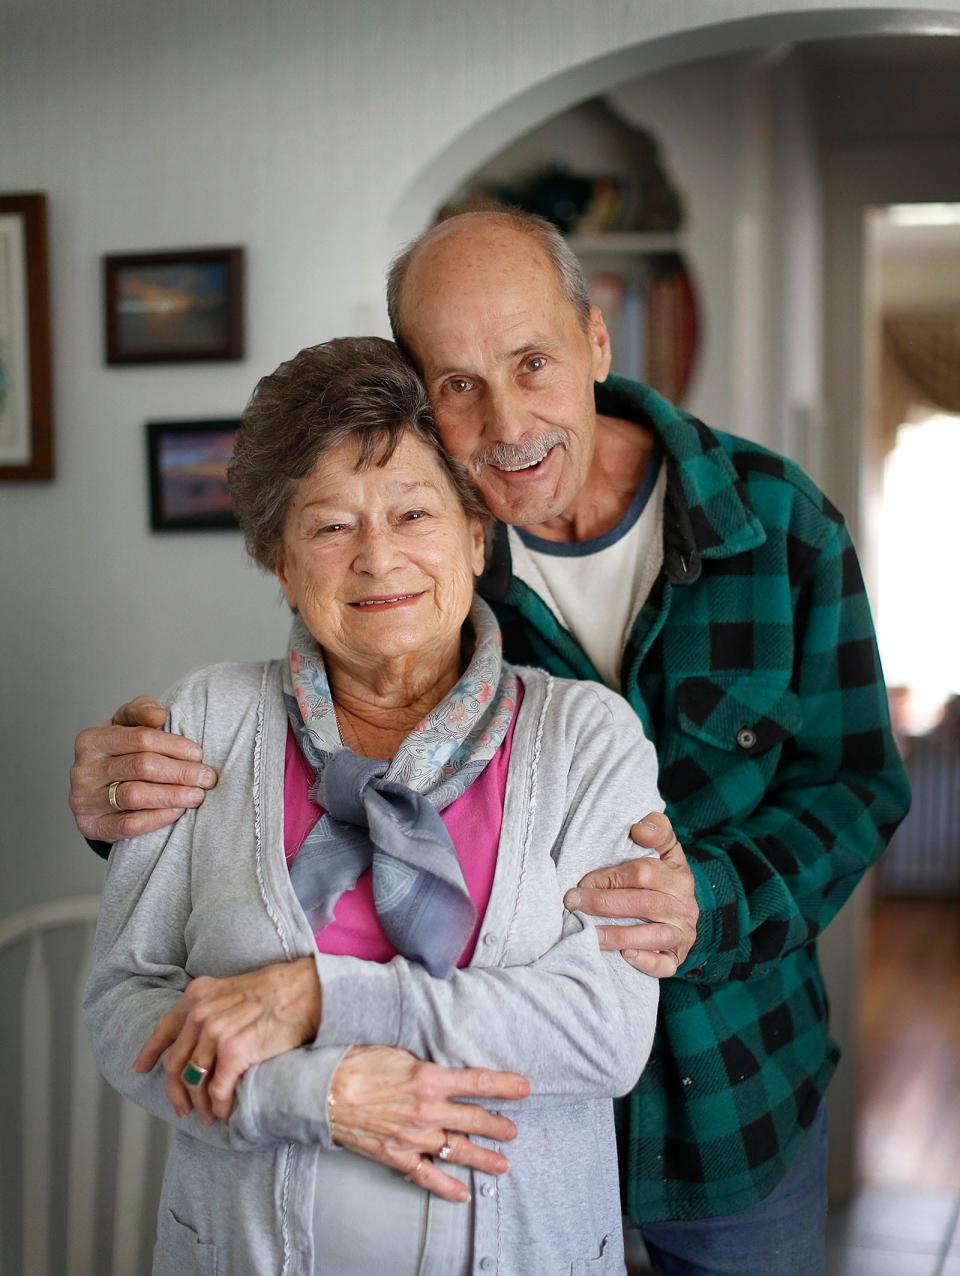 June Newman, of Braintree, with her son, Robert Newman, on Friday, April 29, 2022.